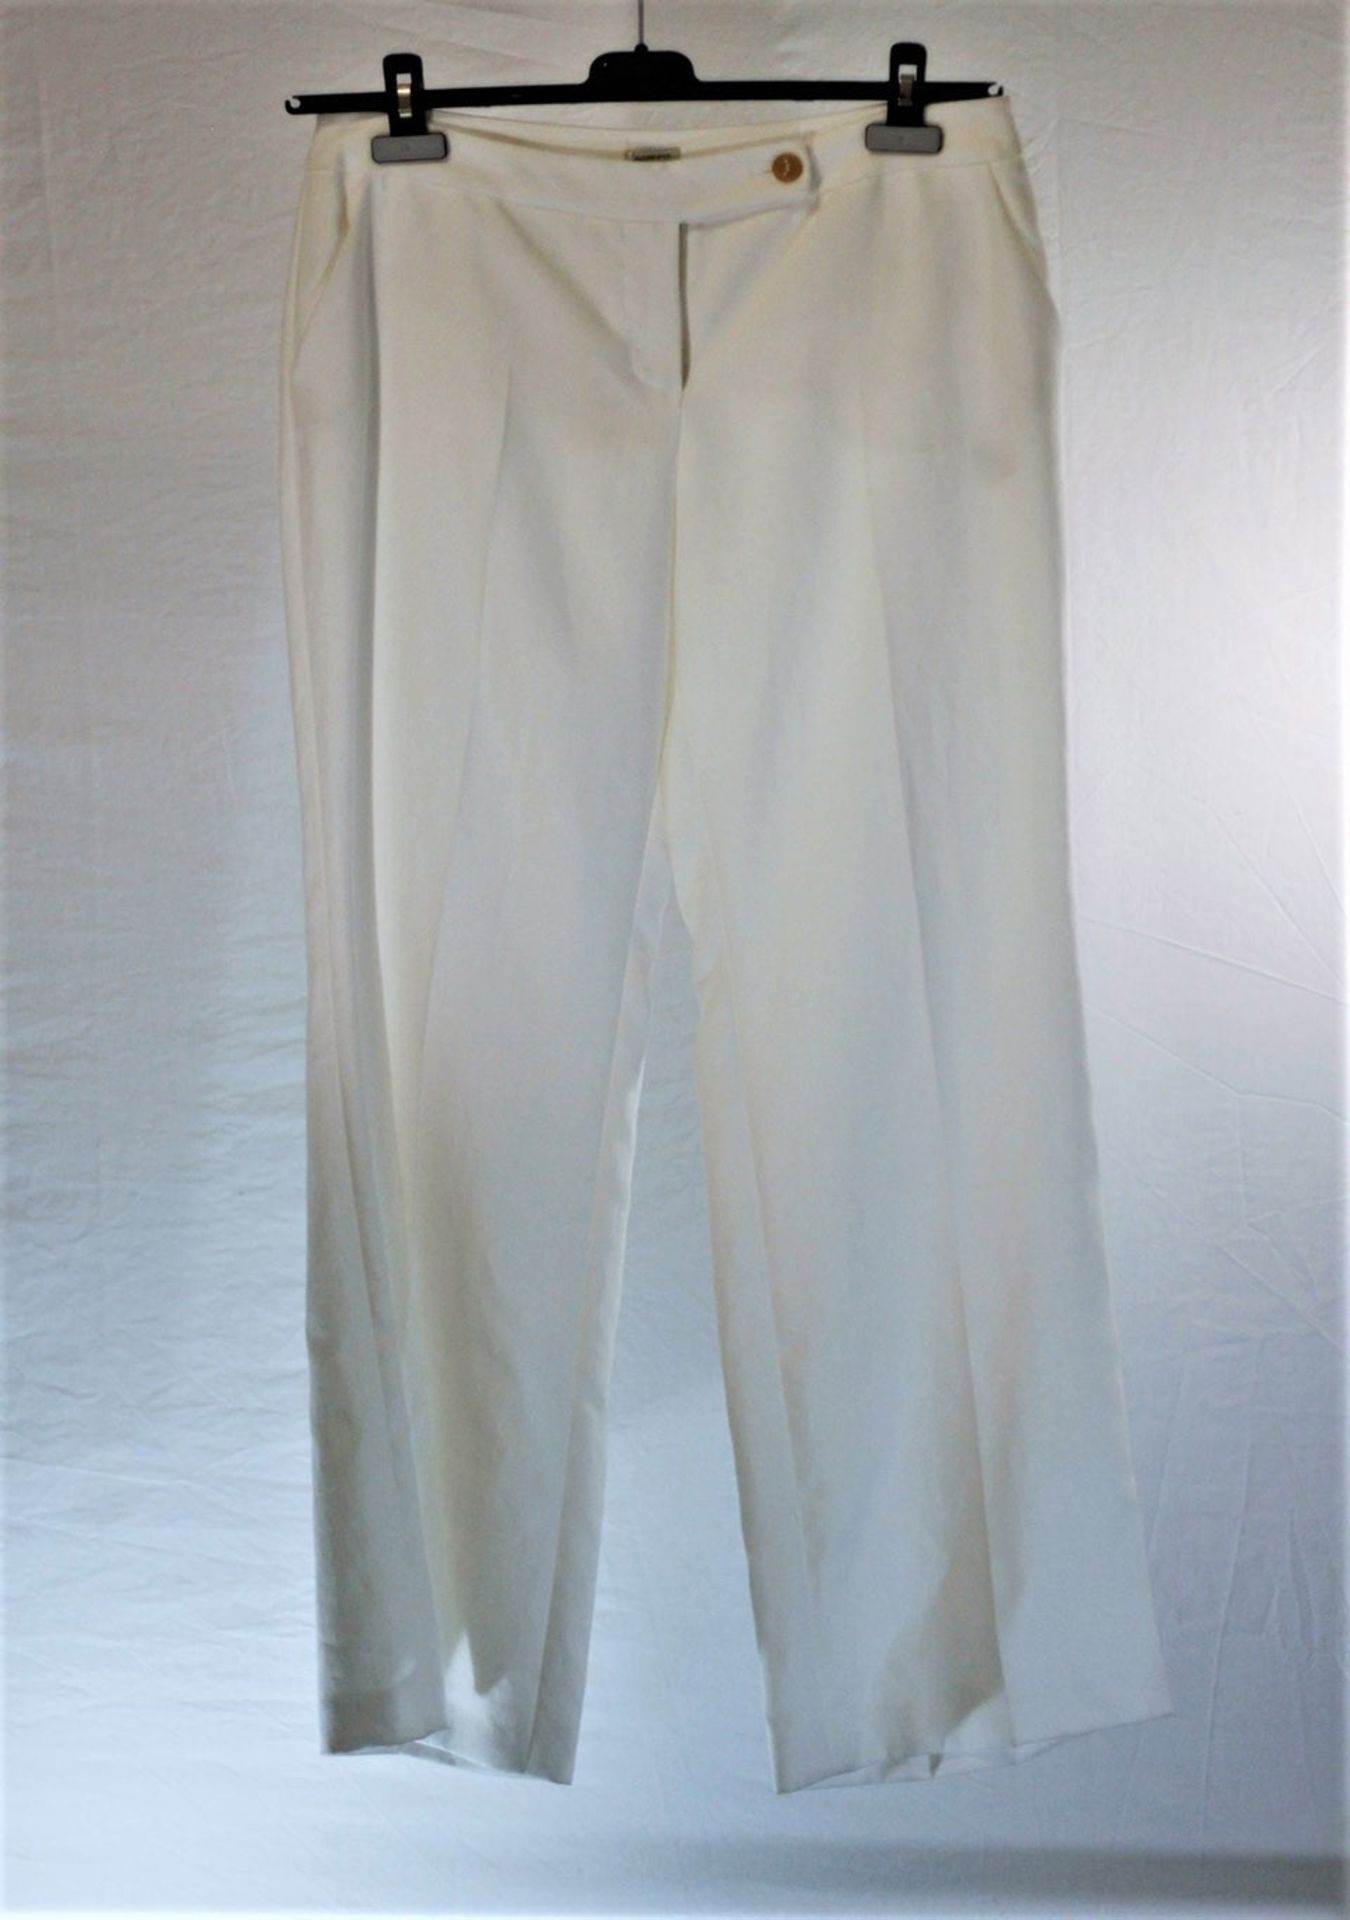 1 x Agnona White Trousers - Size: 16 - Material: 100% Ramie. Lining 52% Viscose, 48% Cotton - From a - Image 6 of 7